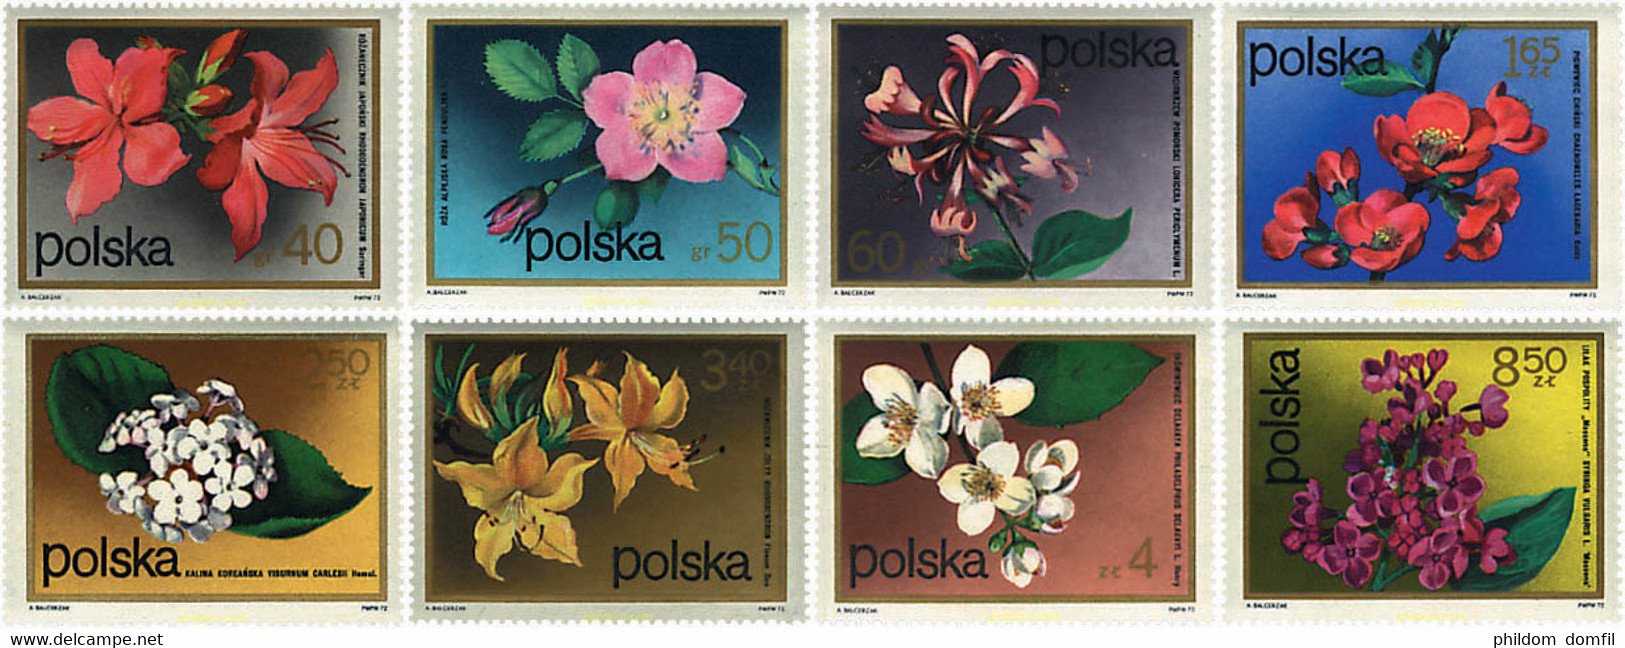 94364 MNH POLONIA 1972 FLORES - Unclassified